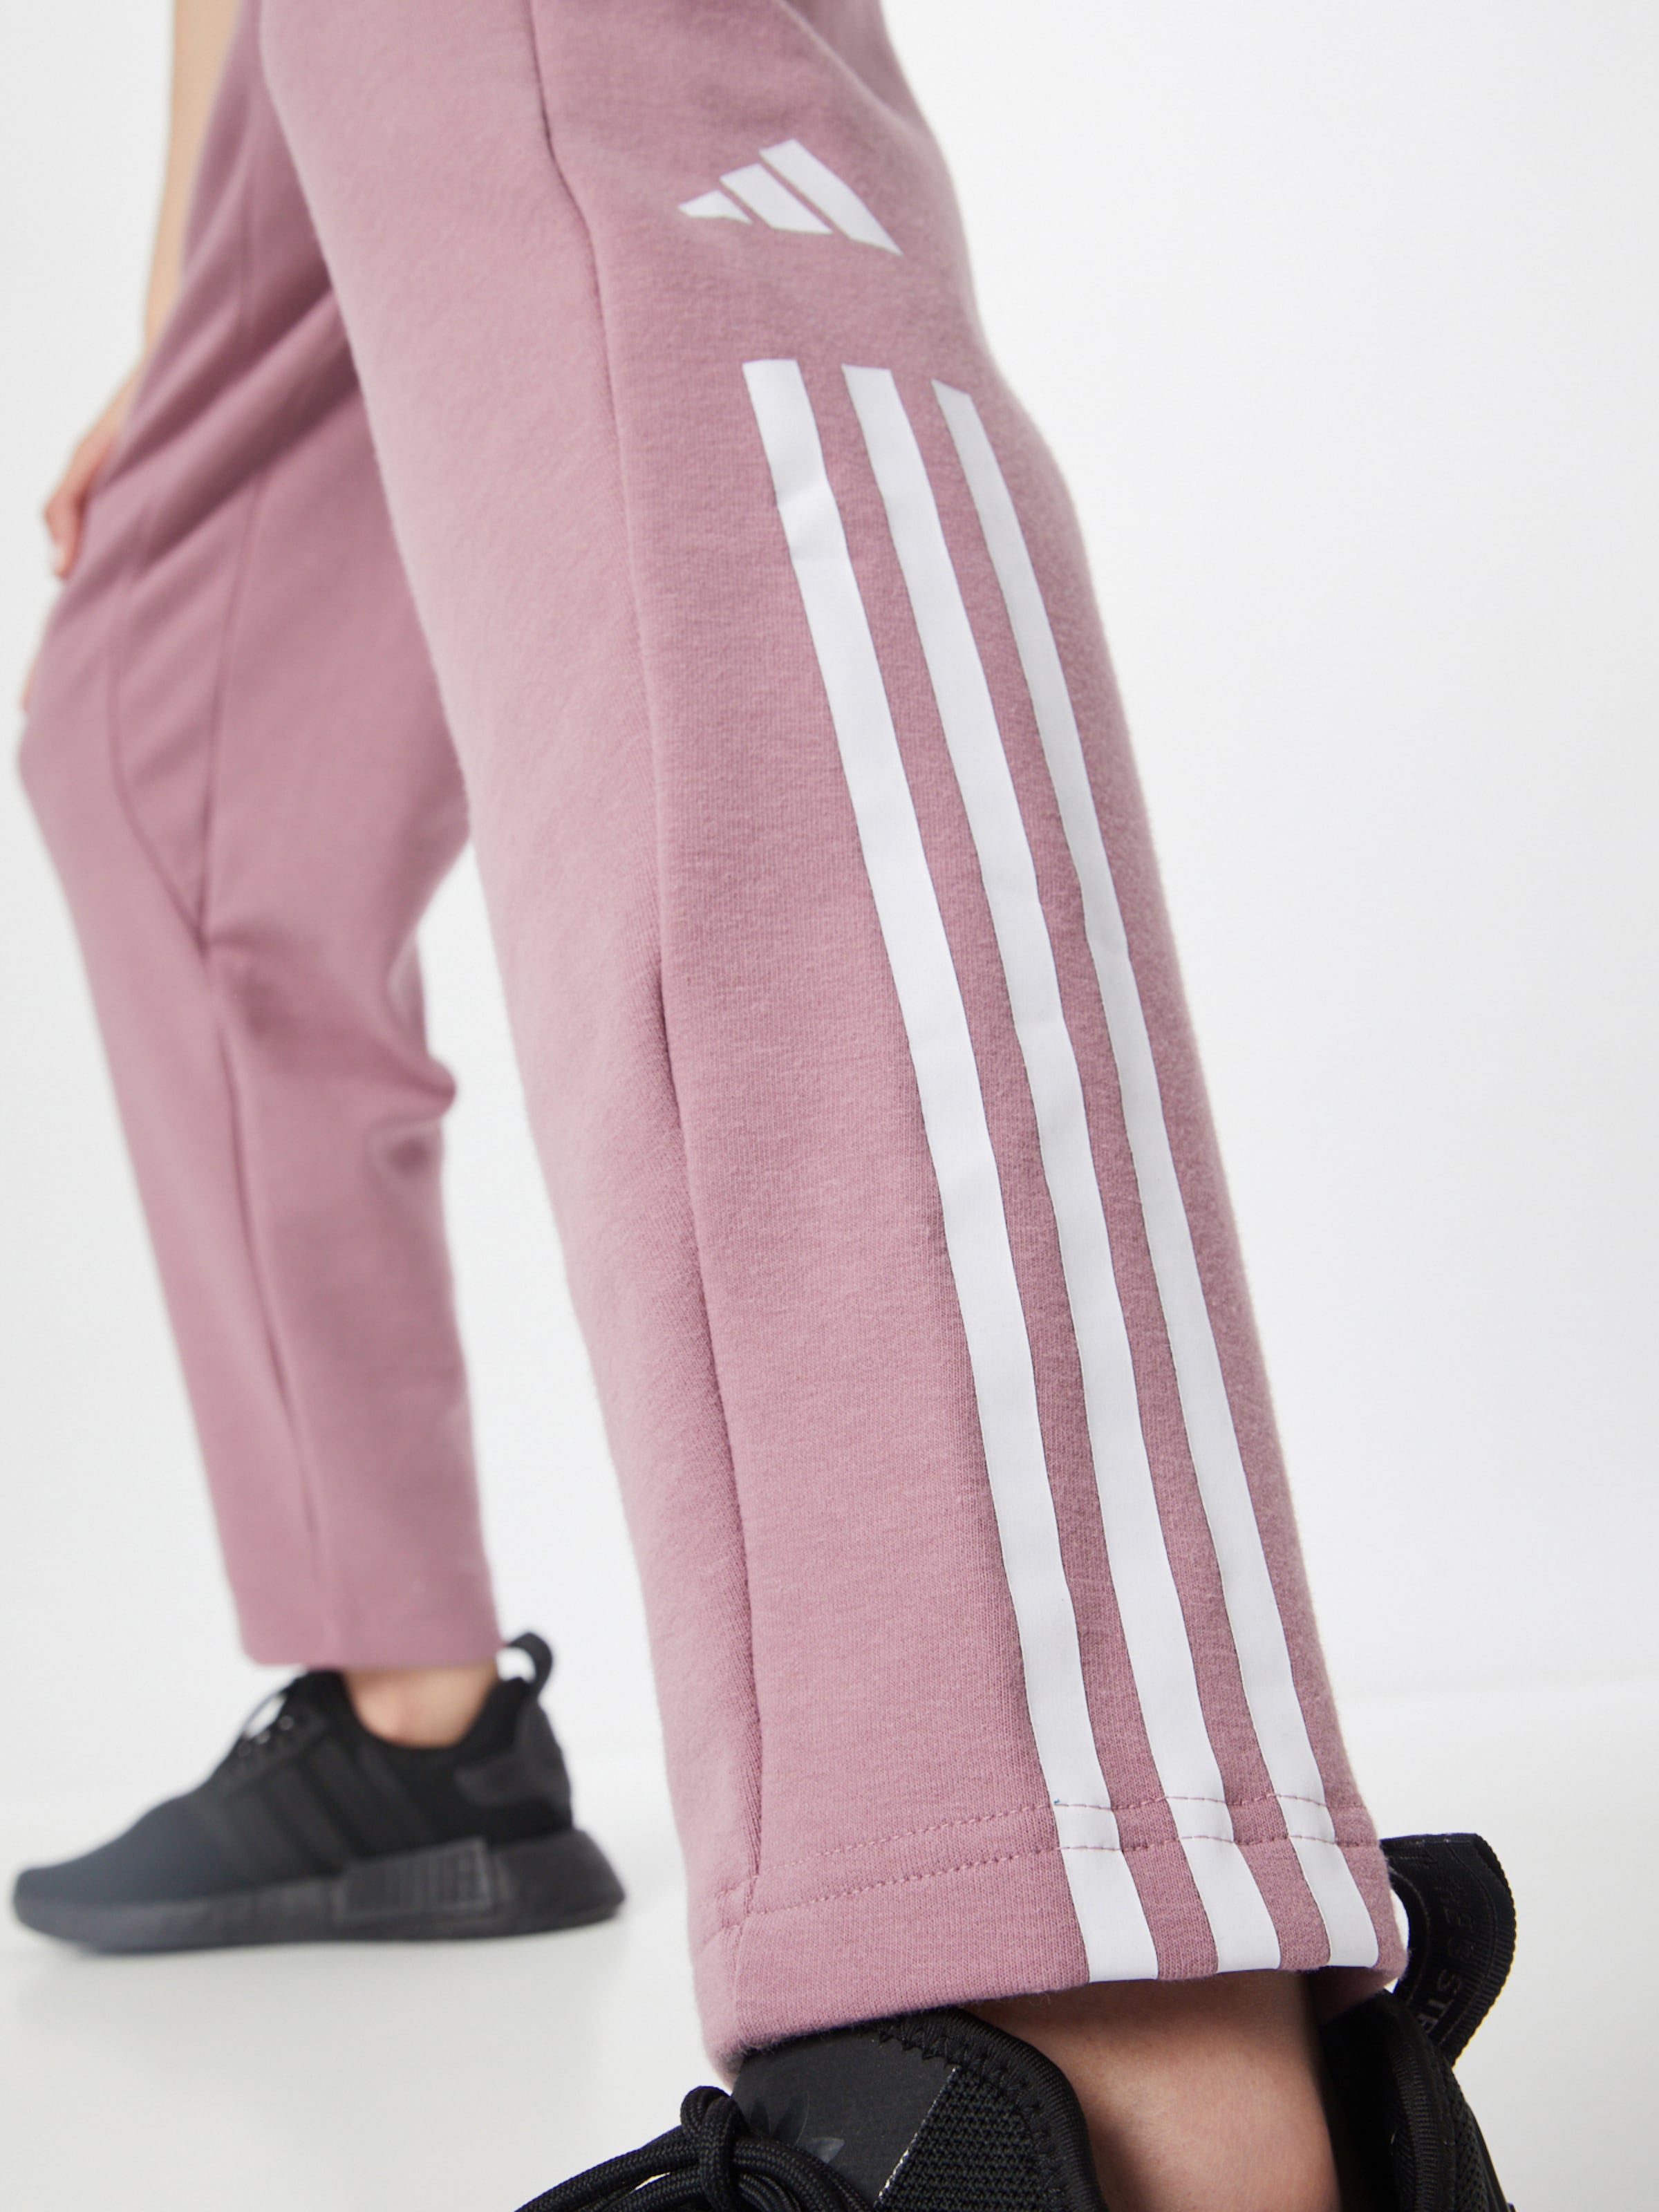 ADIDAS PERFORMANCE ABOUT in Loose Orchid Essentials-Fit YOU fit \' \'Train Pants | Workout